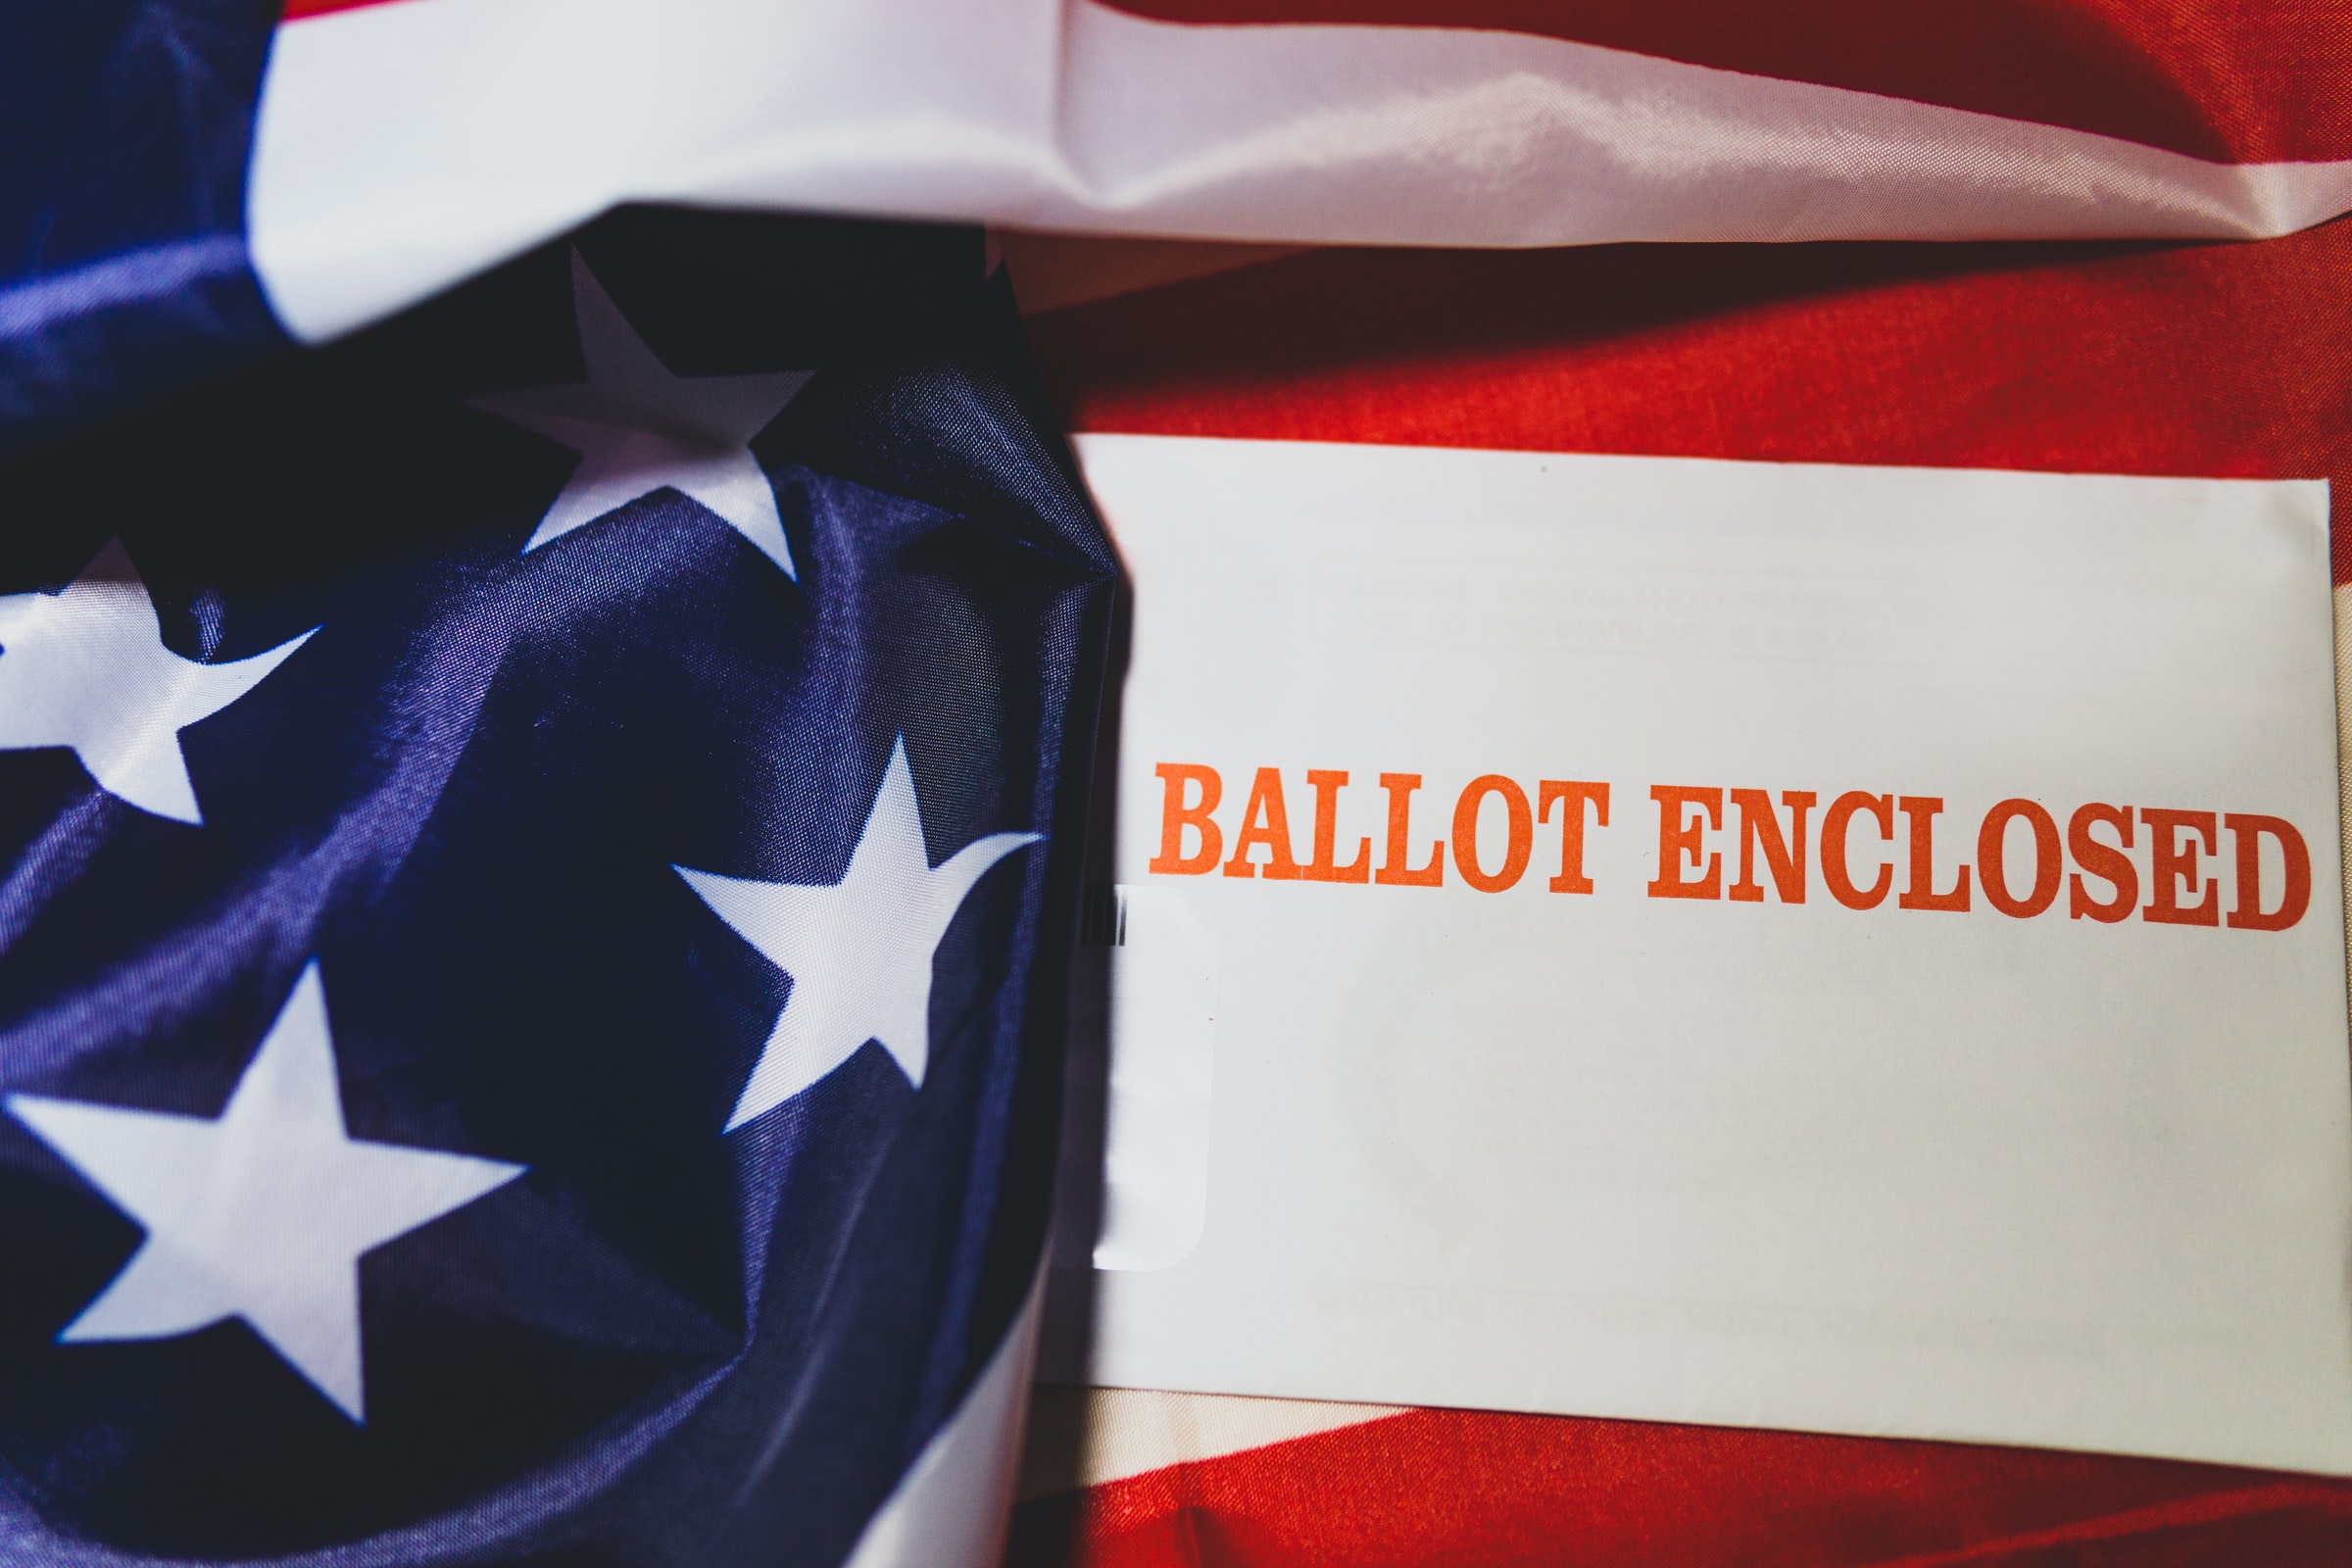 The stars from the American flag with a card laying on top of the stripes that says "BALLOT ENCLOSED" 